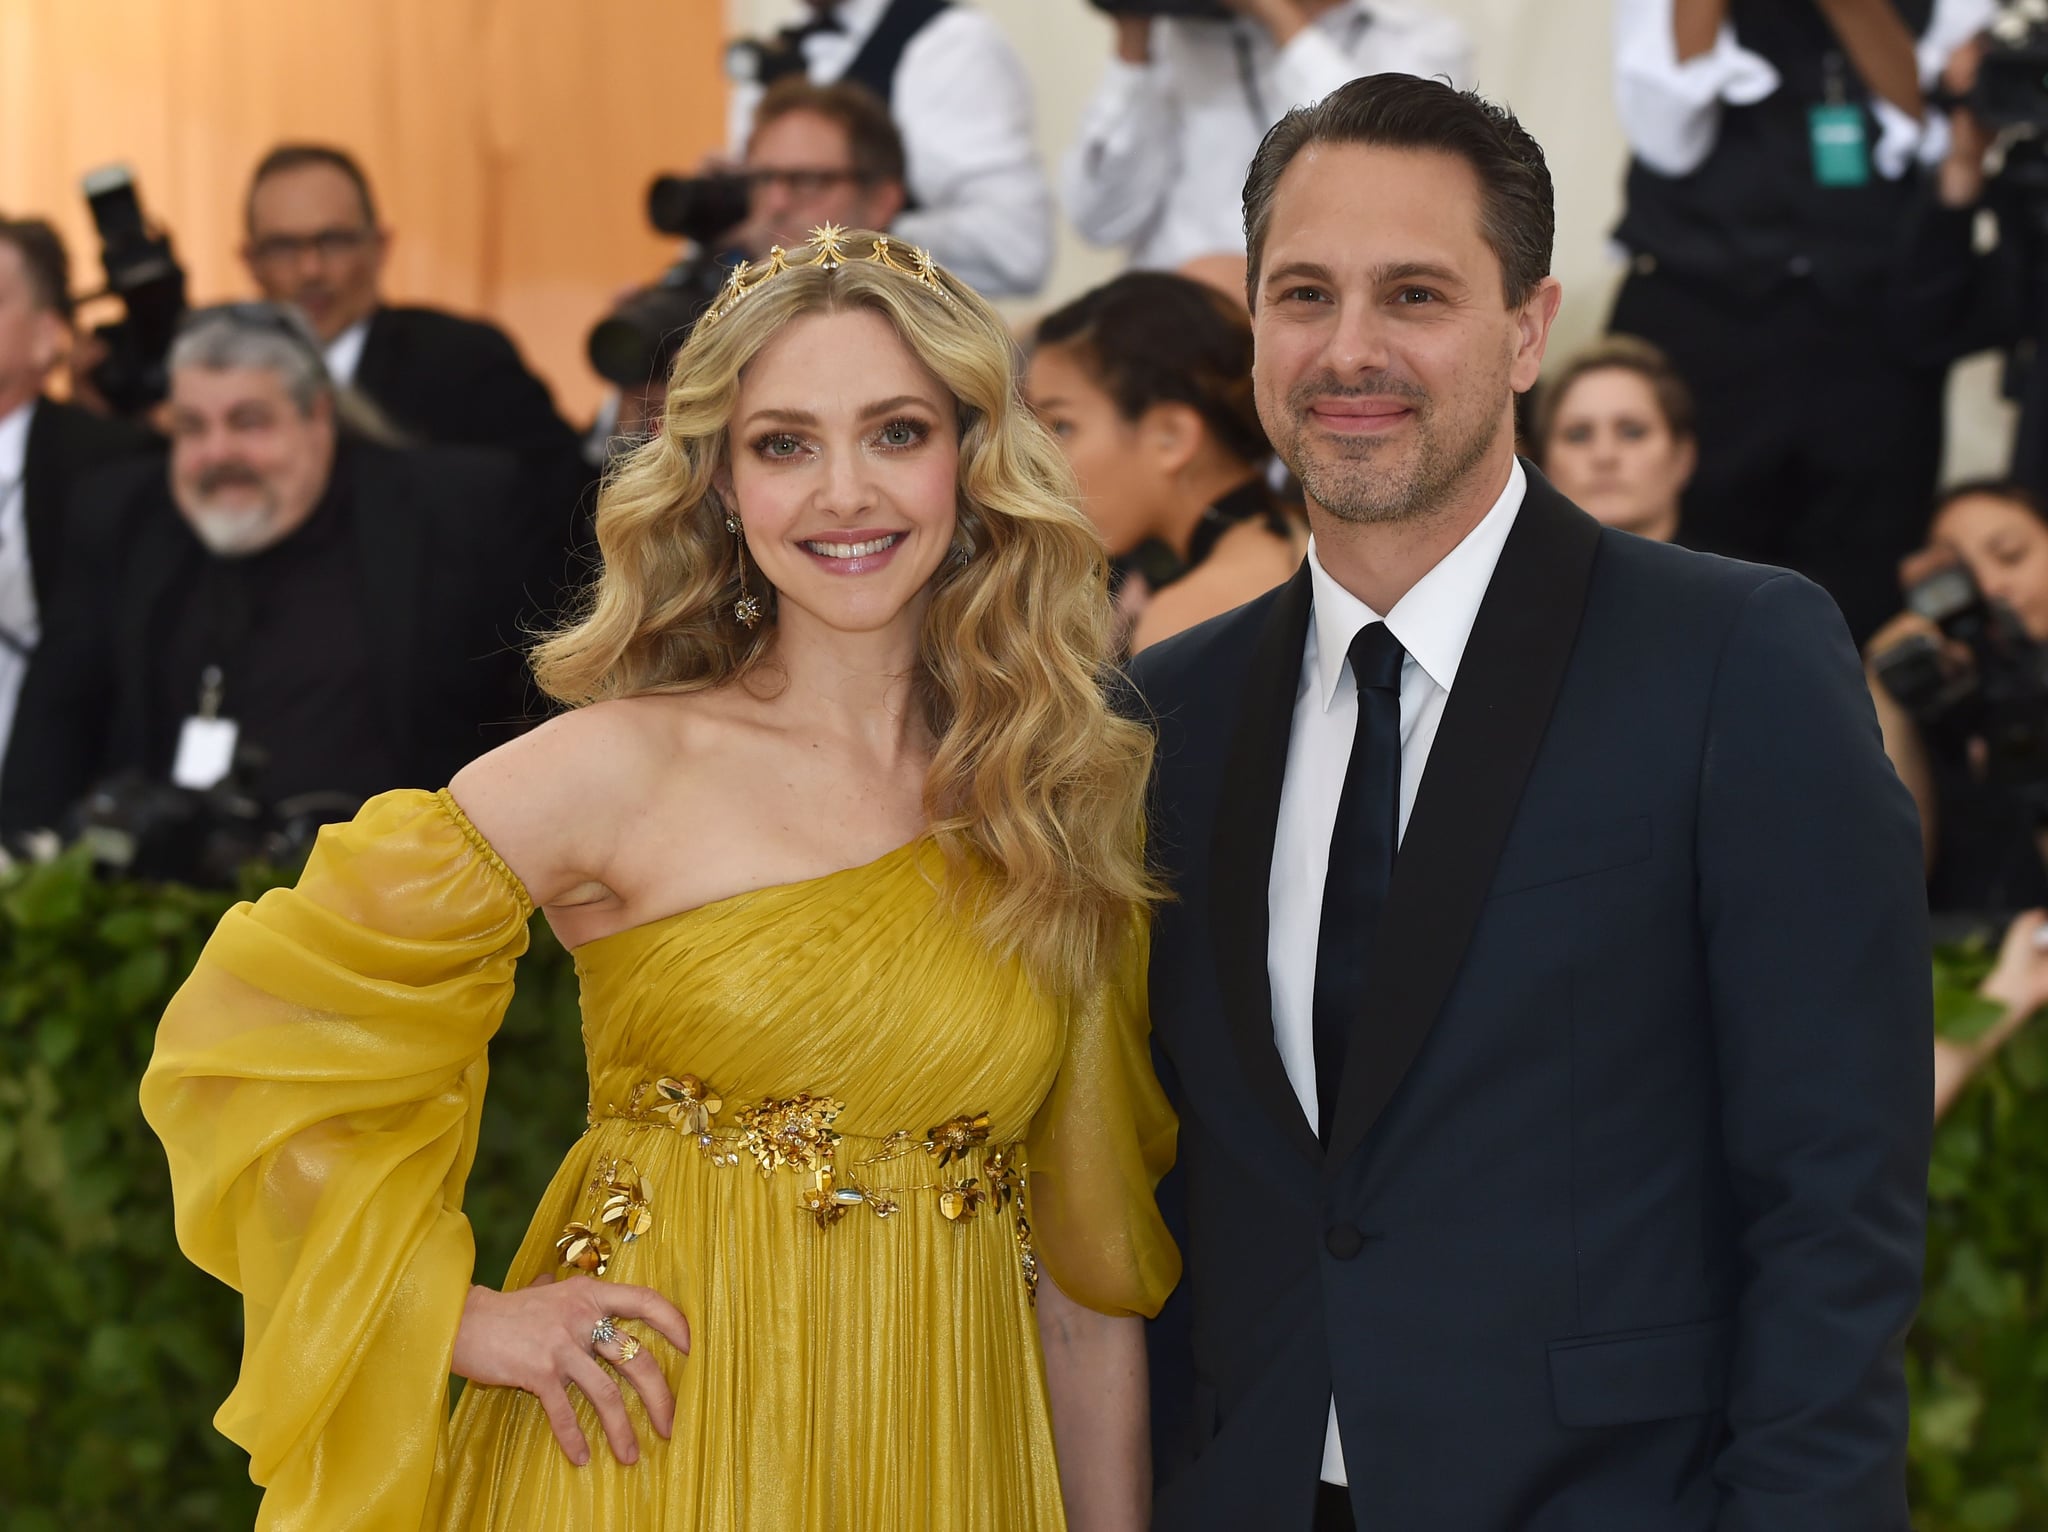 Amanda Seyfried and Thomas Sadoski arrive for the 2018 Met Gala on May 7, 2018, at the Metropolitan Museum of Art in New York. - The Gala raises money for the Metropolitan Museum of Arts Costume Institute. The Gala's 2018 theme is Heavenly Bodies: Fashion and the Catholic Imagination. (Photo by Hector RETAMAL / AFP)        (Photo credit should read HECTOR RETAMAL/AFP/Getty Images)